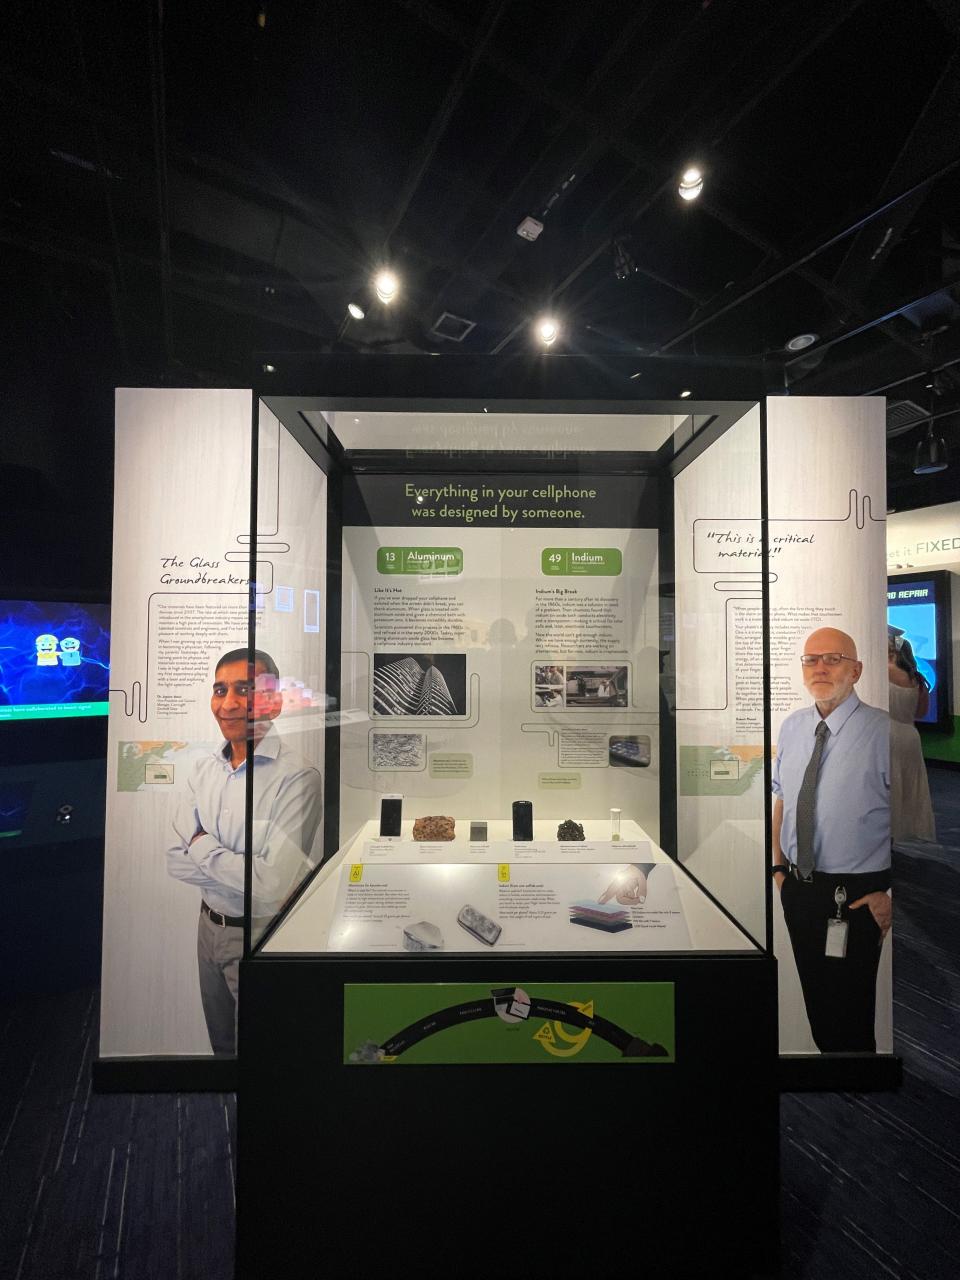 Materials from Indium Corporation are included in Smithsonian exhibit on cellphone technology.